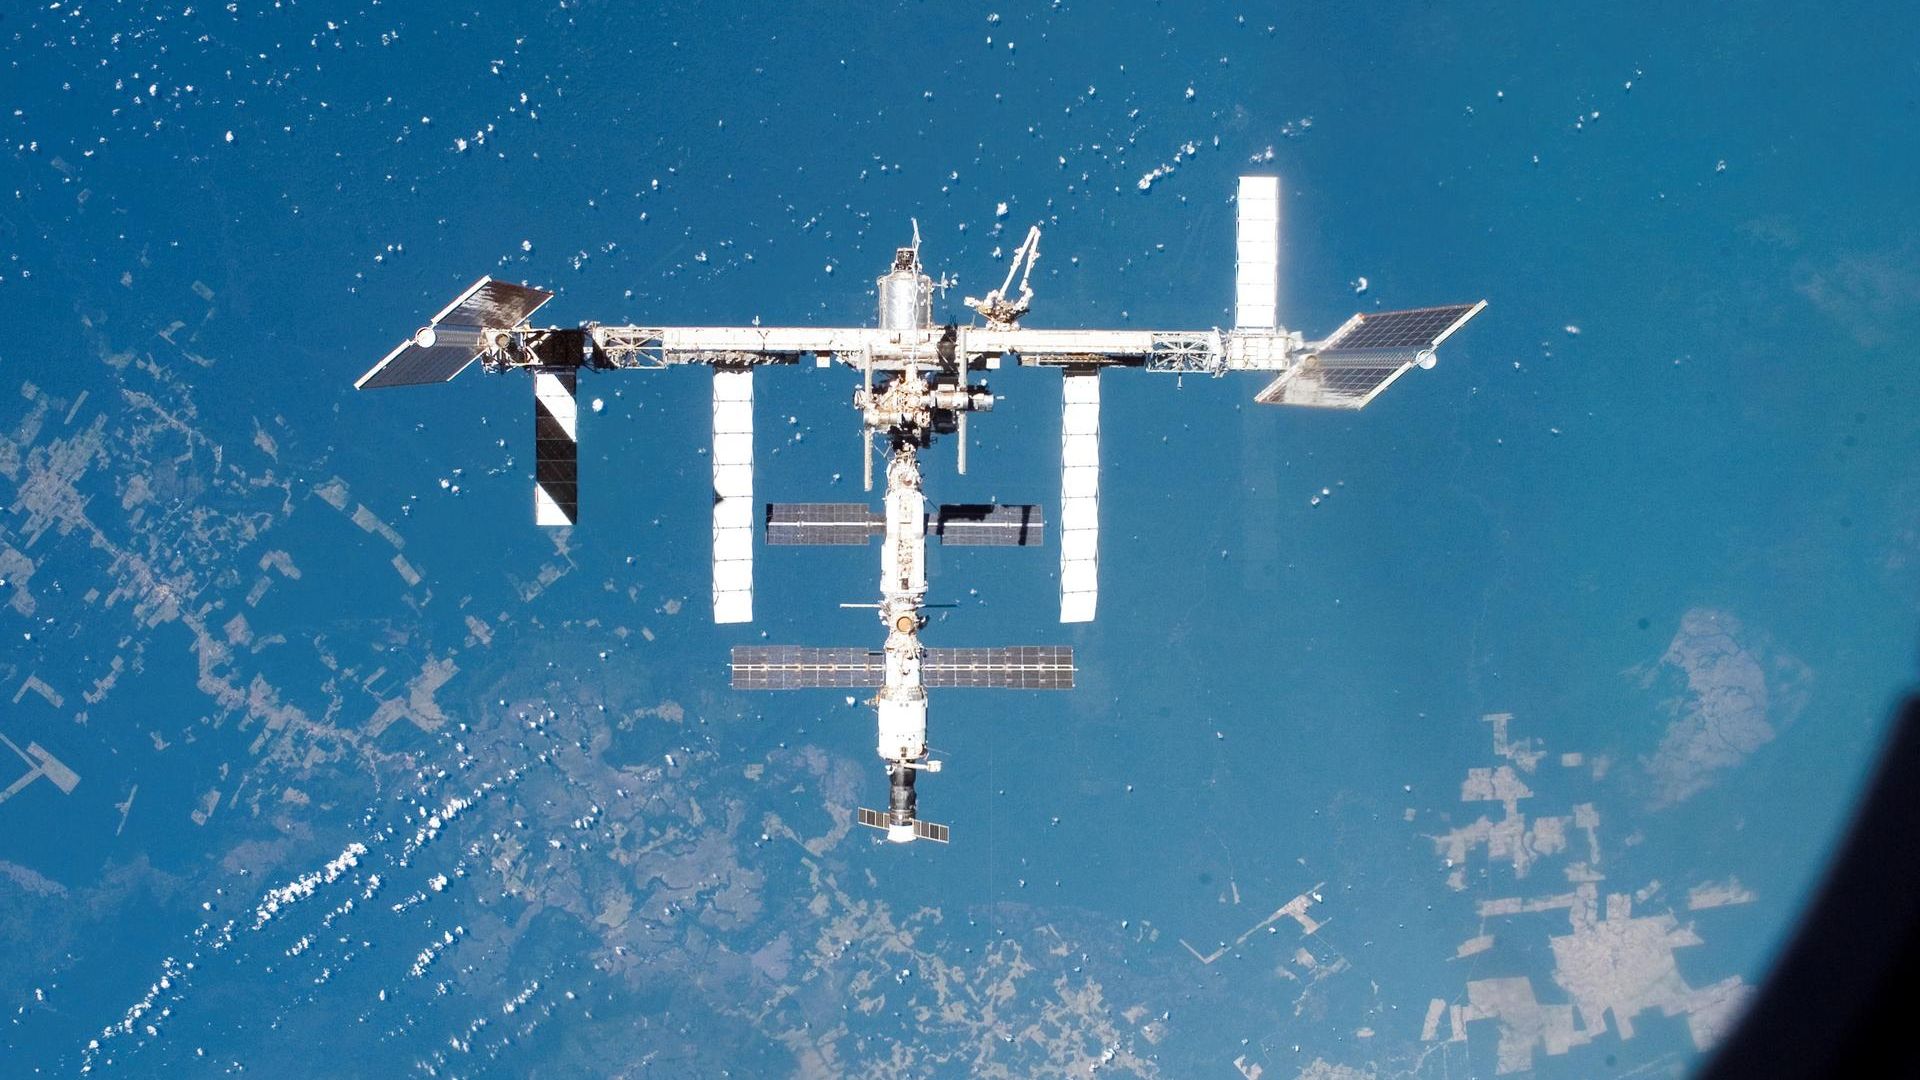 The International Space Station as seen above Earth